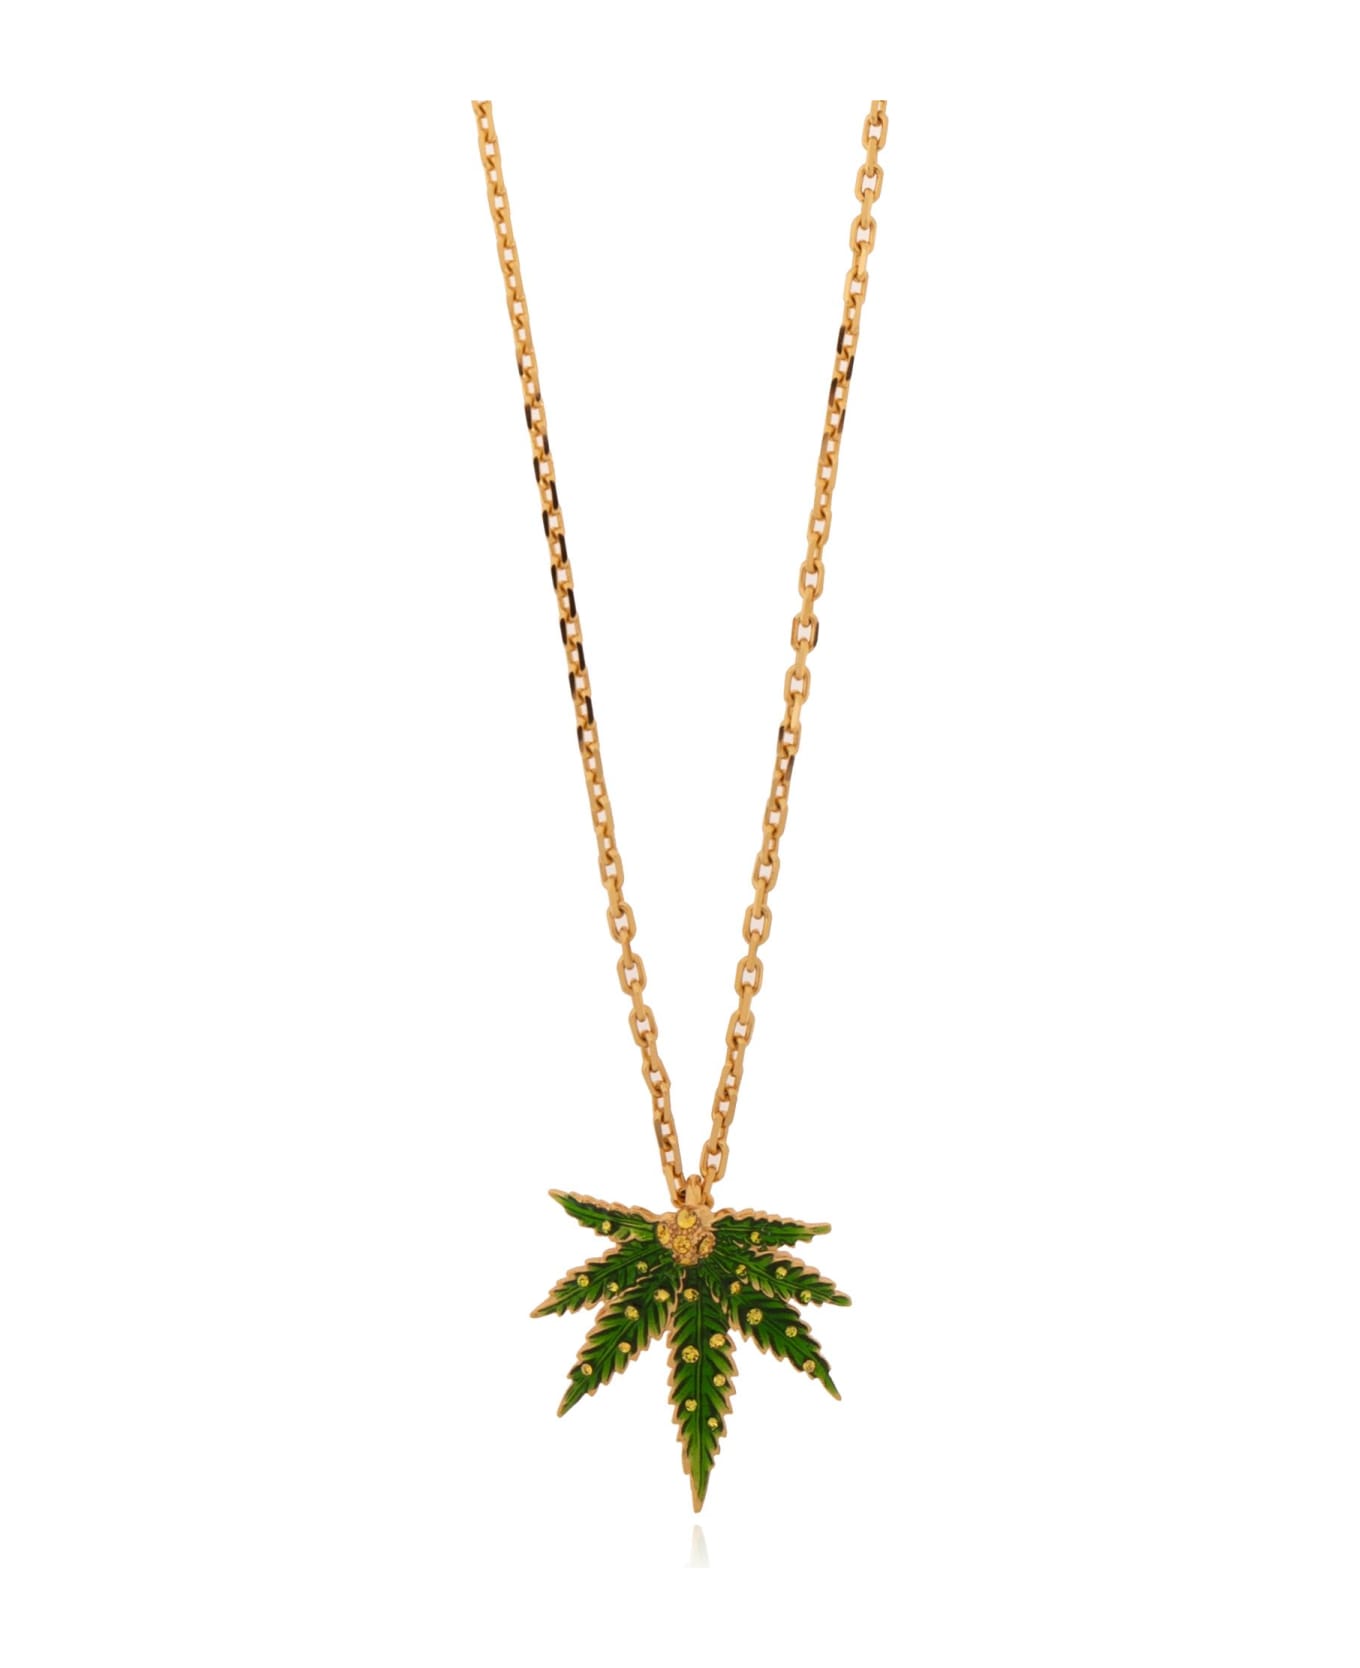 Dsquared2 Brass Necklace - GOLD